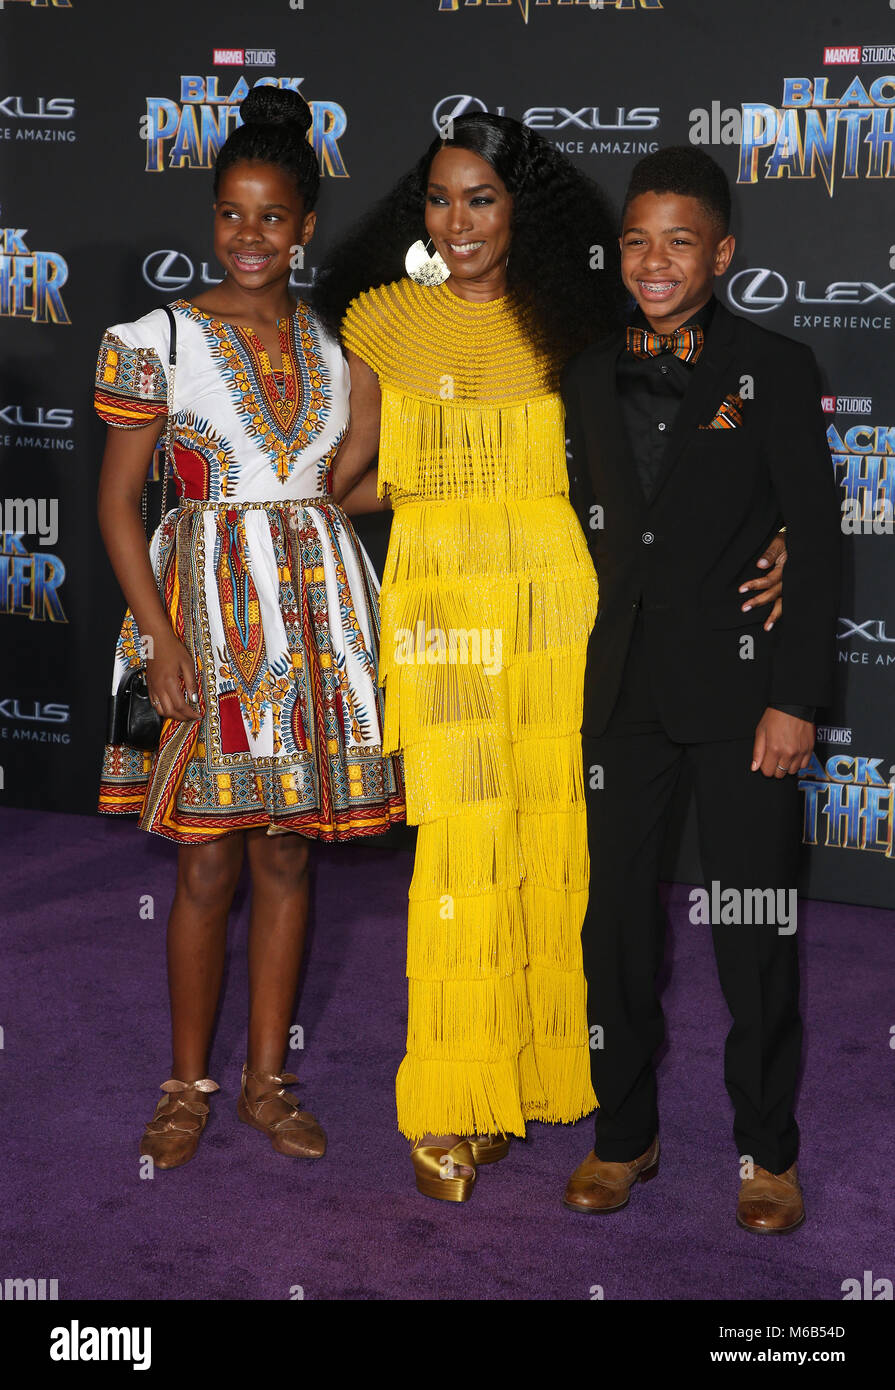 World Premiere of Marvel Studios Black Panther  Featuring: Angela Bassett, Bronwyn Vance, Slater Vance Where: Hollywood, California, United States When: 30 Jan 2018 Credit: FayesVision/WENN.com Stock Photo